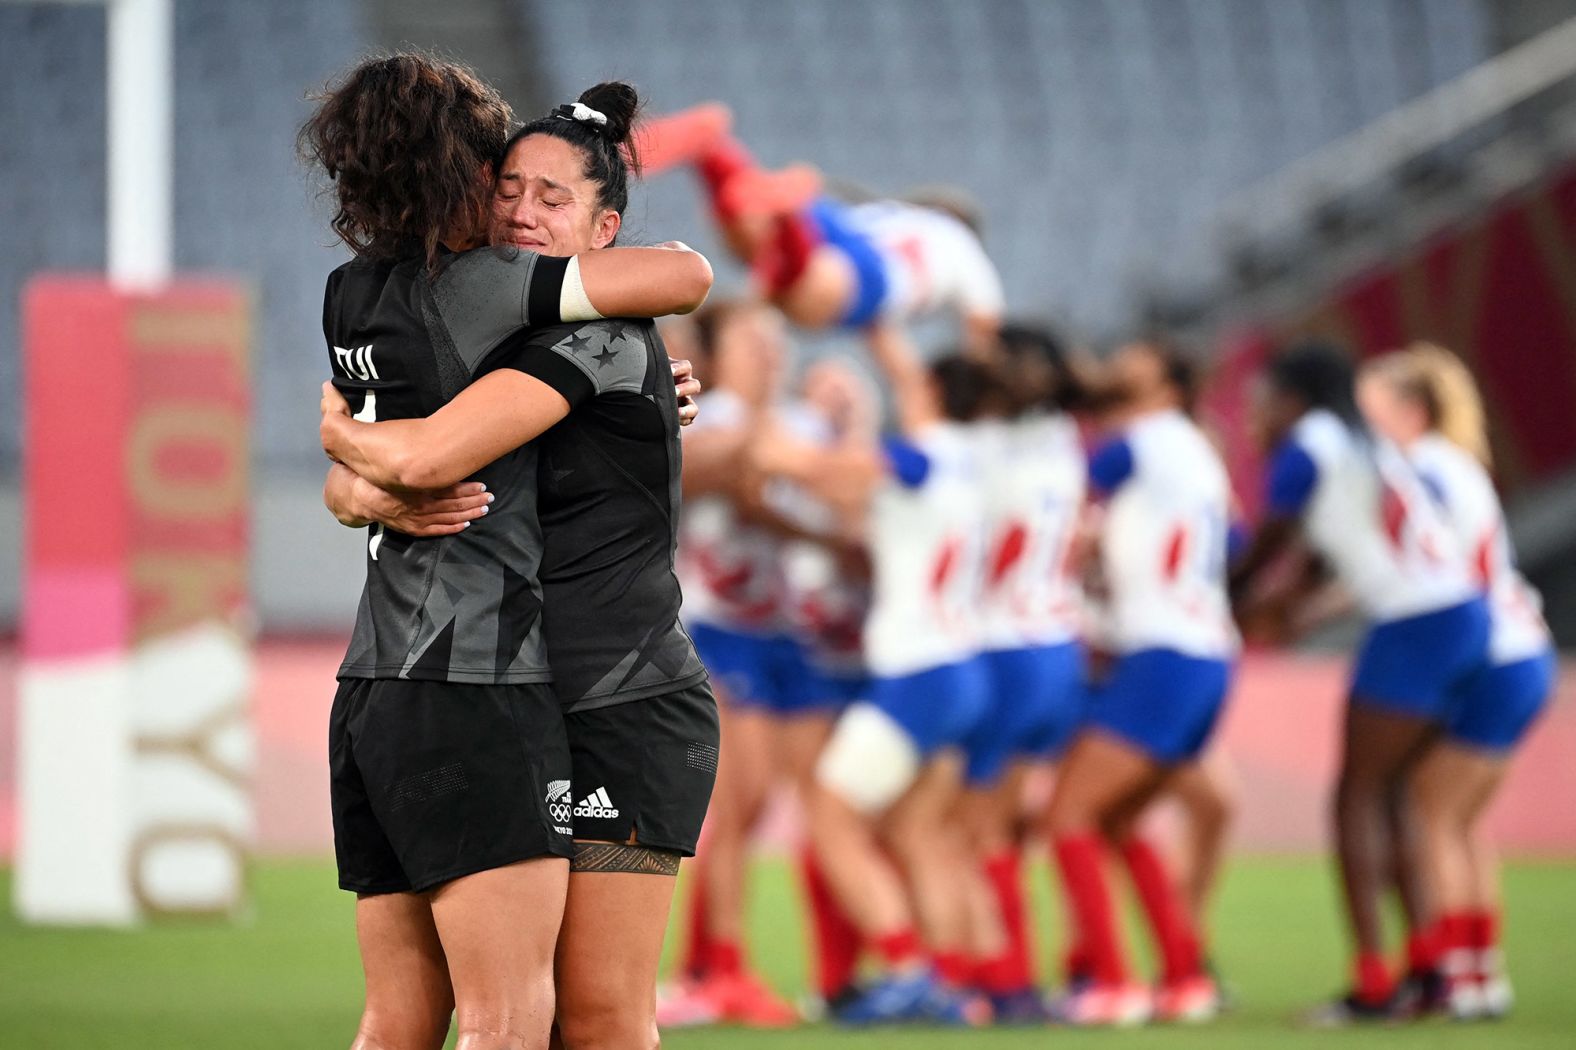 Members of New Zealand's rugby team hug after defeating France <a href="index.php?page=&url=https%3A%2F%2Fwww.cnn.com%2Fworld%2Flive-news%2Ftokyo-2020-olympics-07-31-21-spt%2Fh_c290ab55510bd8ce401aa12537d8b410" target="_blank">to win gold</a> on July 31.